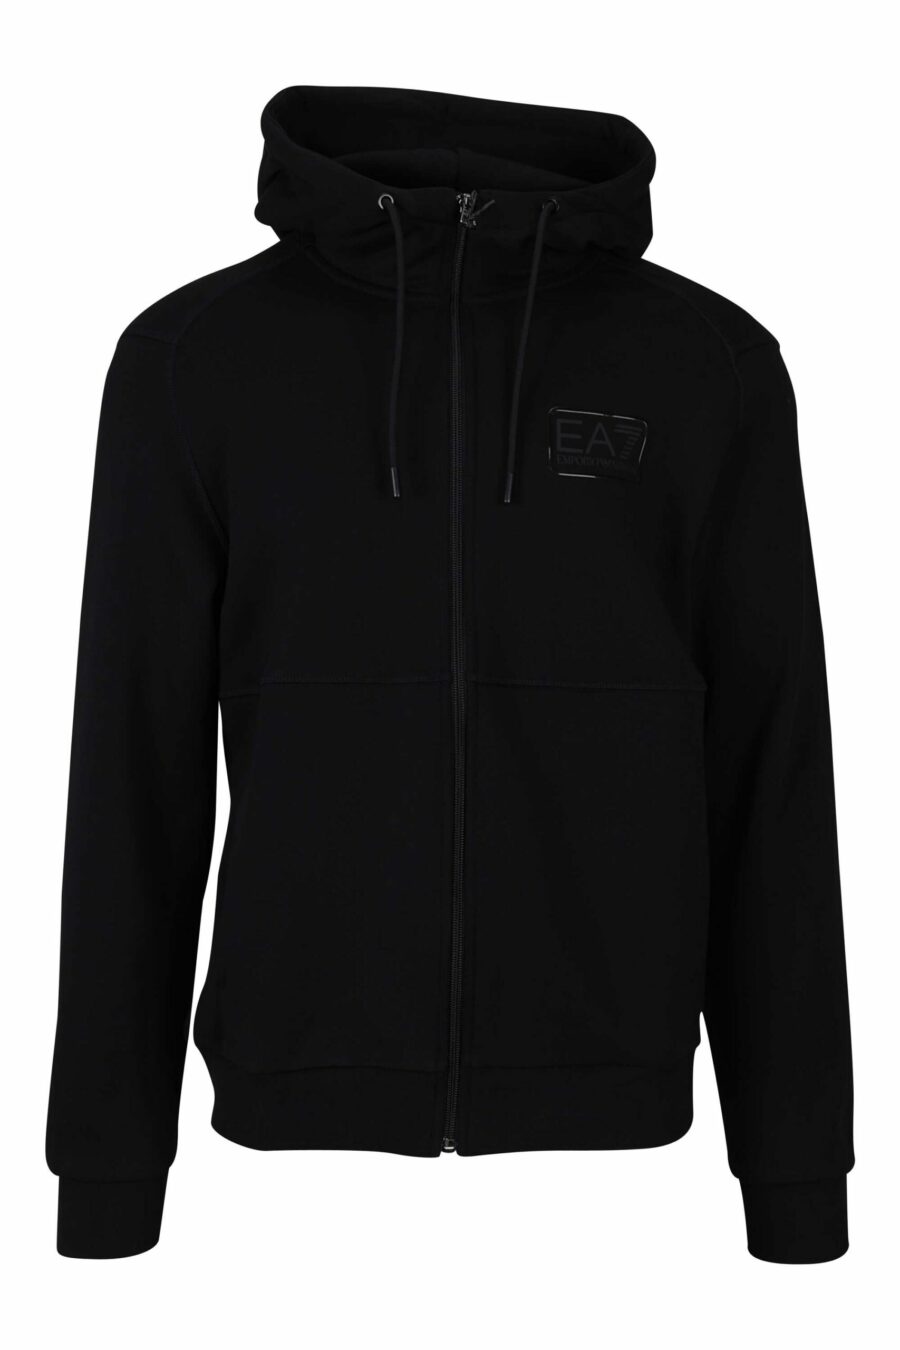 Black hooded sweatshirt with zip and minilogue label "lux identity" - 8056787945869 1 scaled